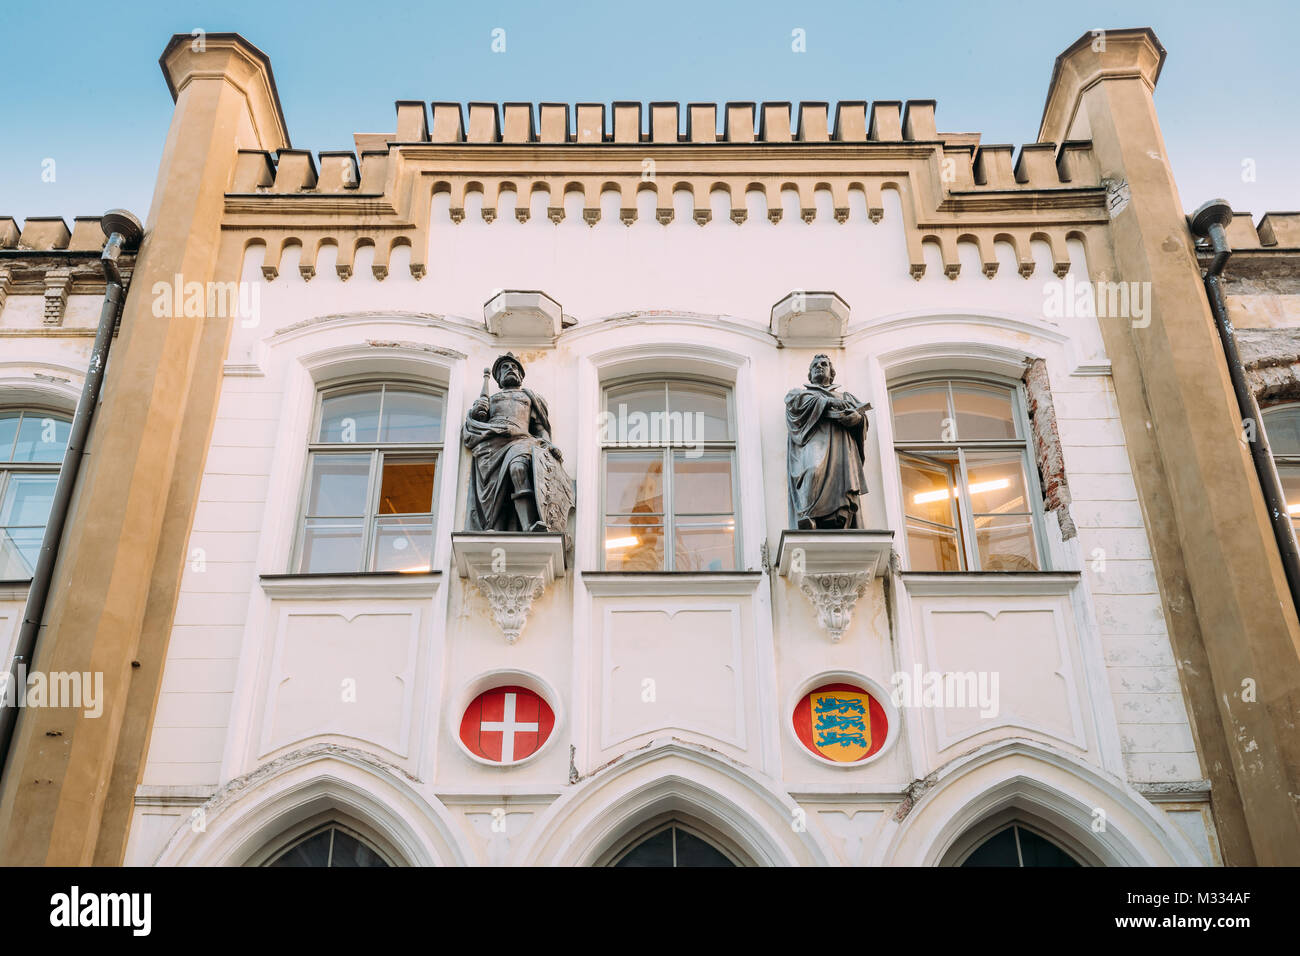 Tallinn, Estonia. Building Of Saint Canute Guild. The Guild Encompassed A Number Of Associations Of Finer Craftsman, Mostly Germans By Origin. Stock Photo